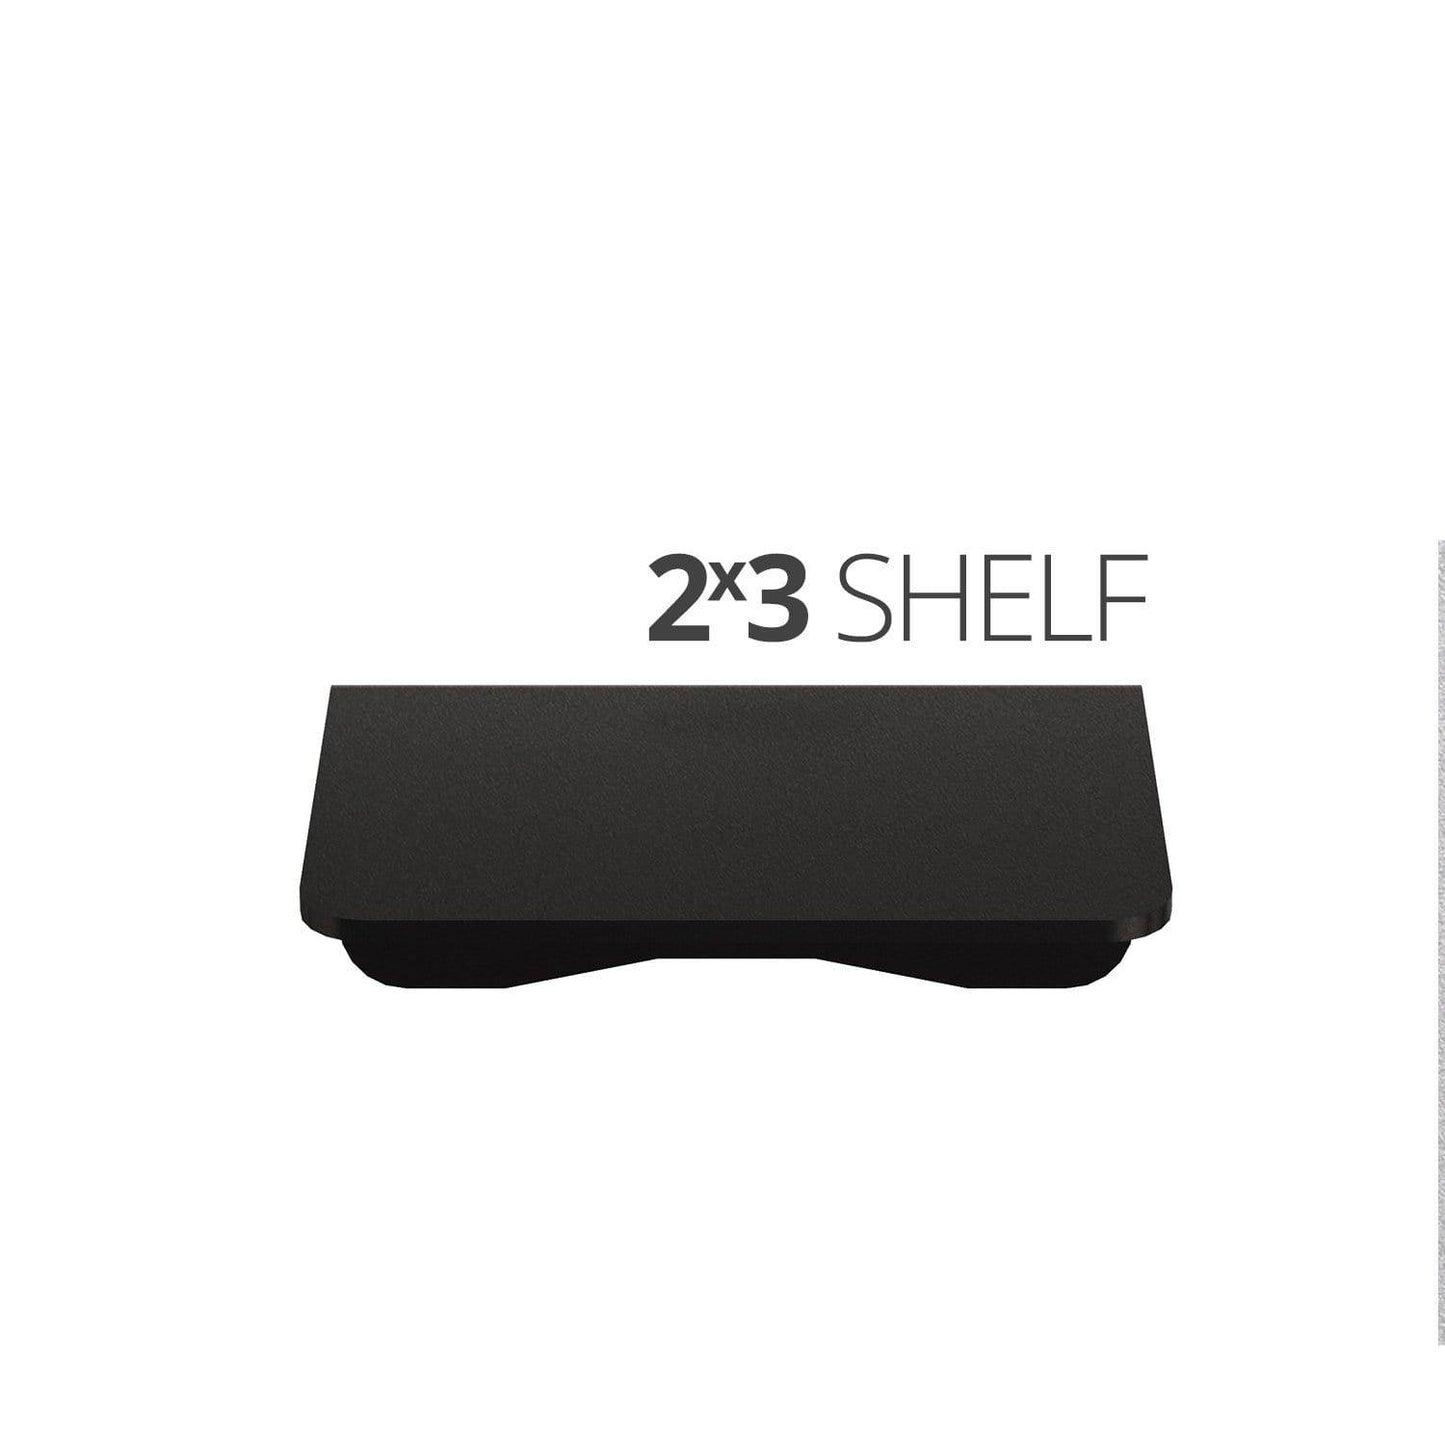 Small wall mounted shelves for home, office and garage - 2x3